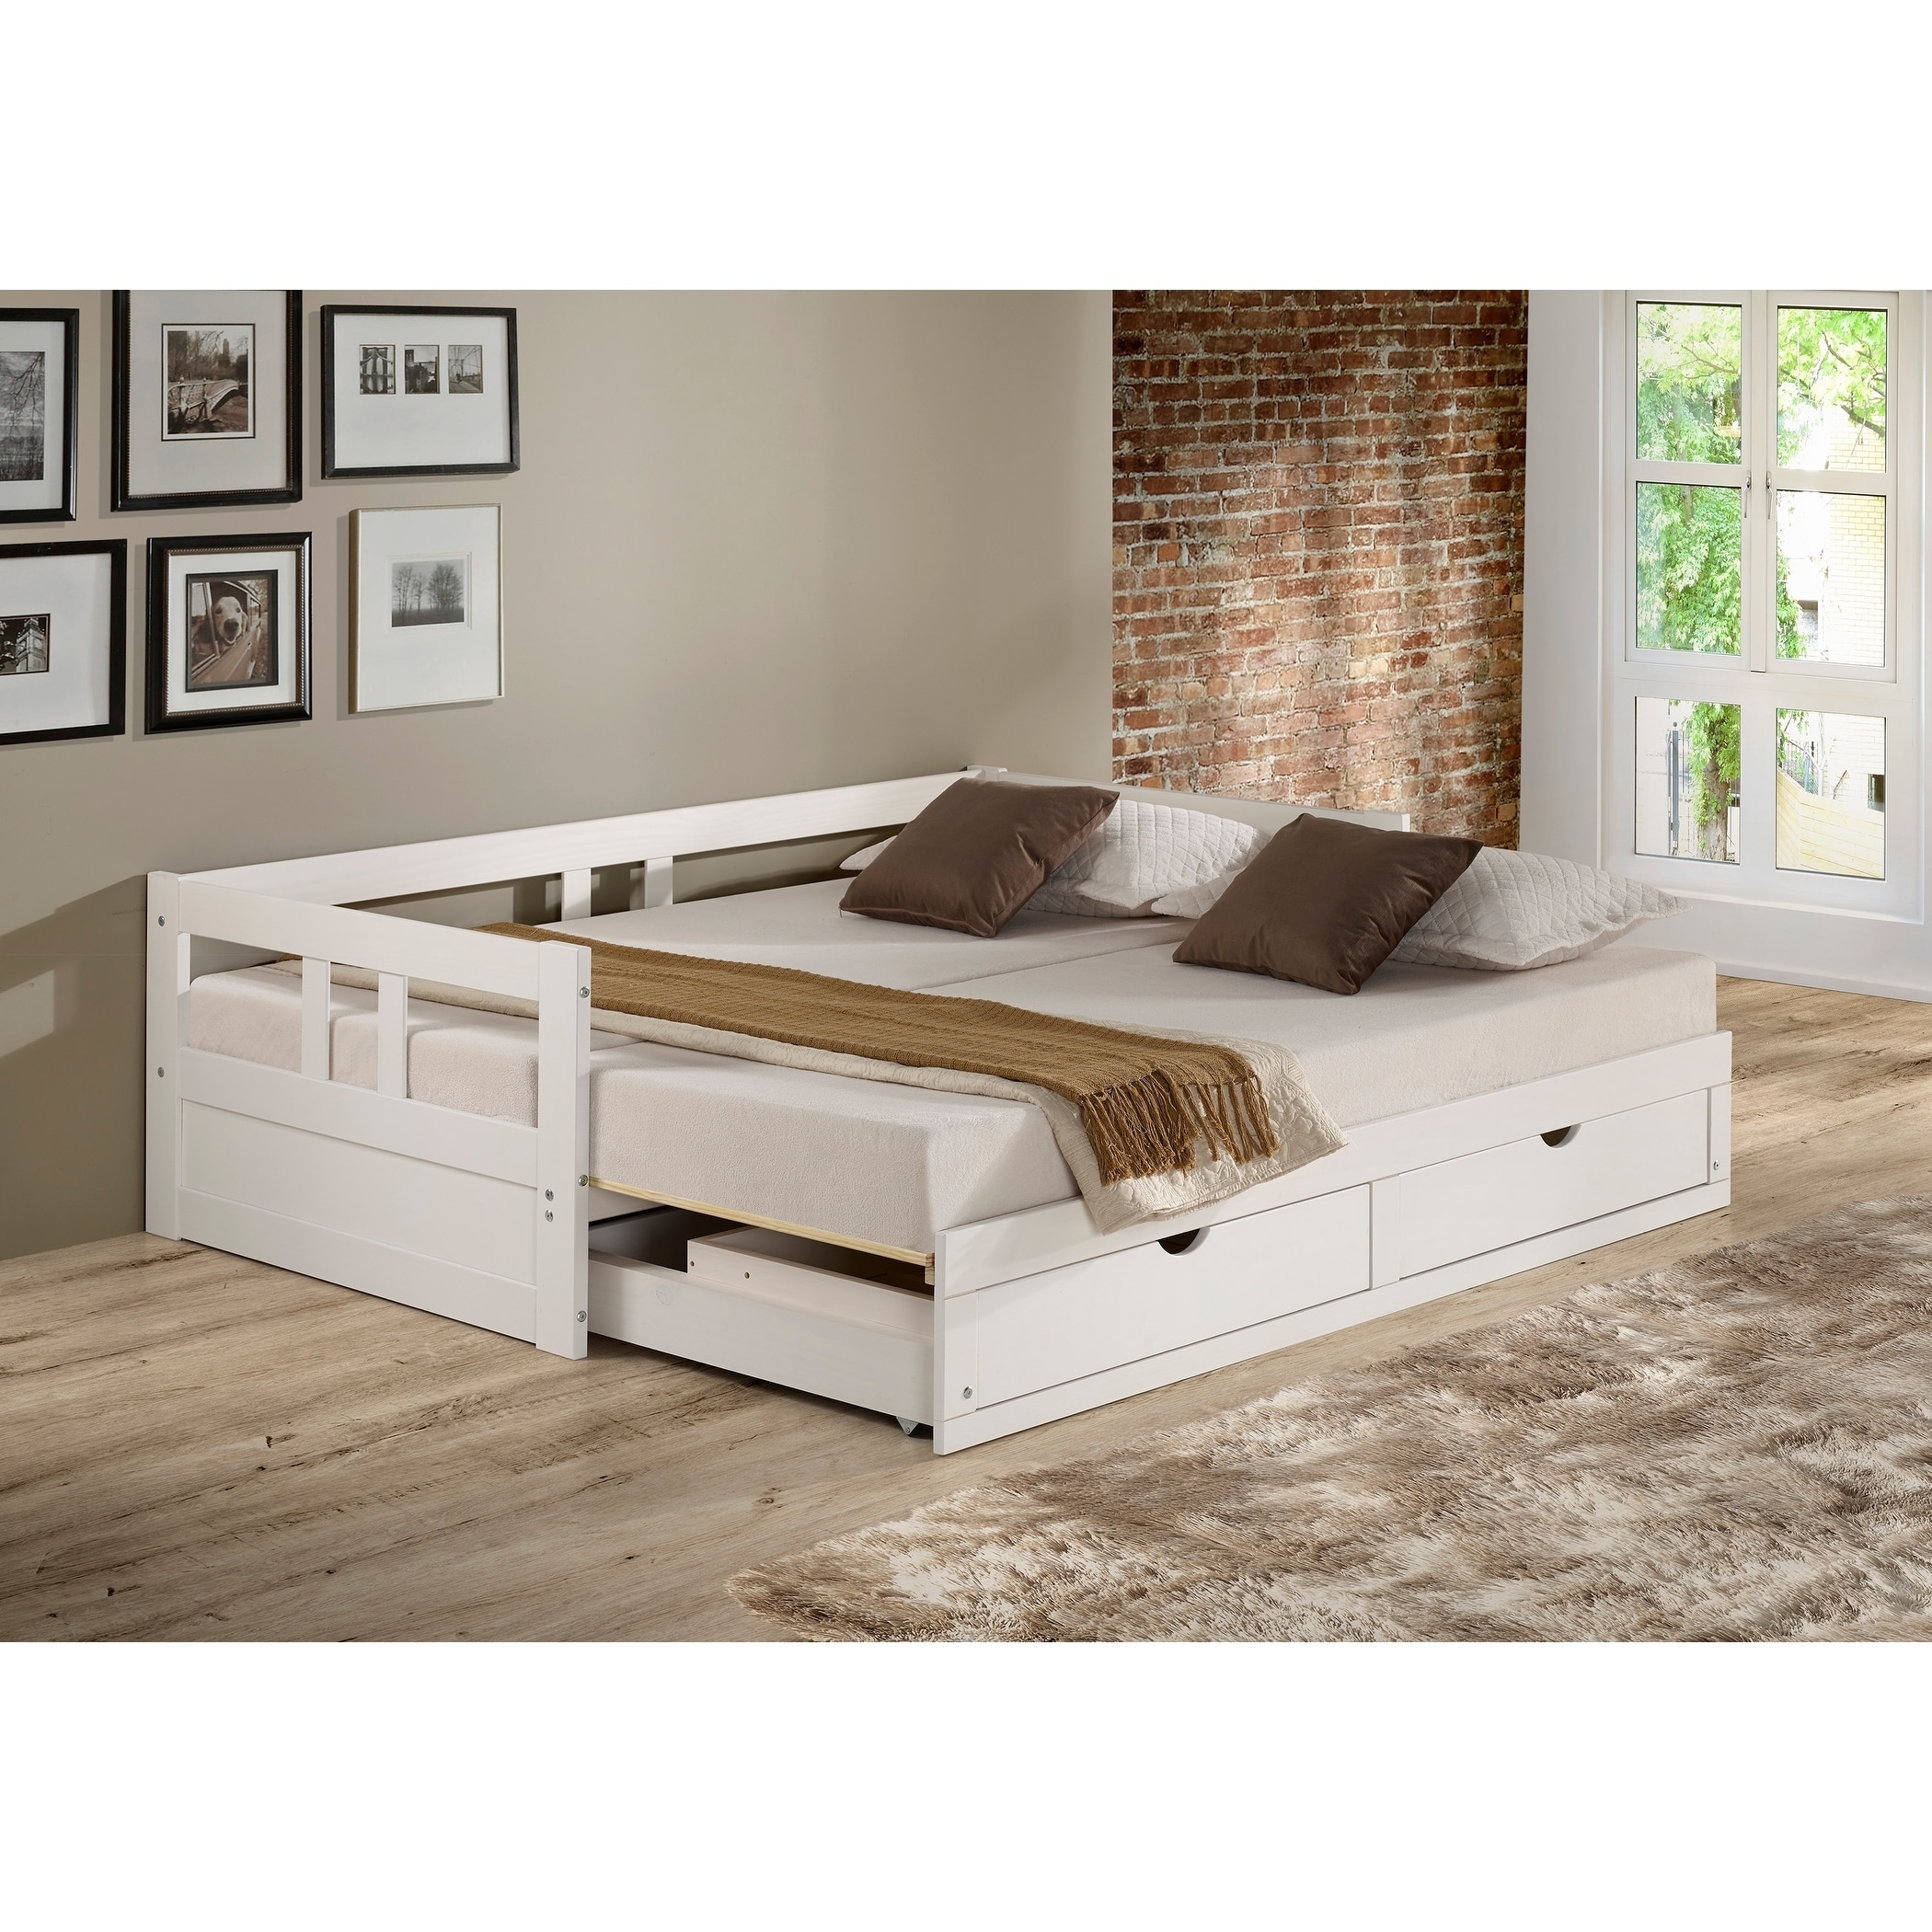 Melody Twin To King Trundle Daybed With Storage Drawers White Bed Bath And Beyond 18105350 